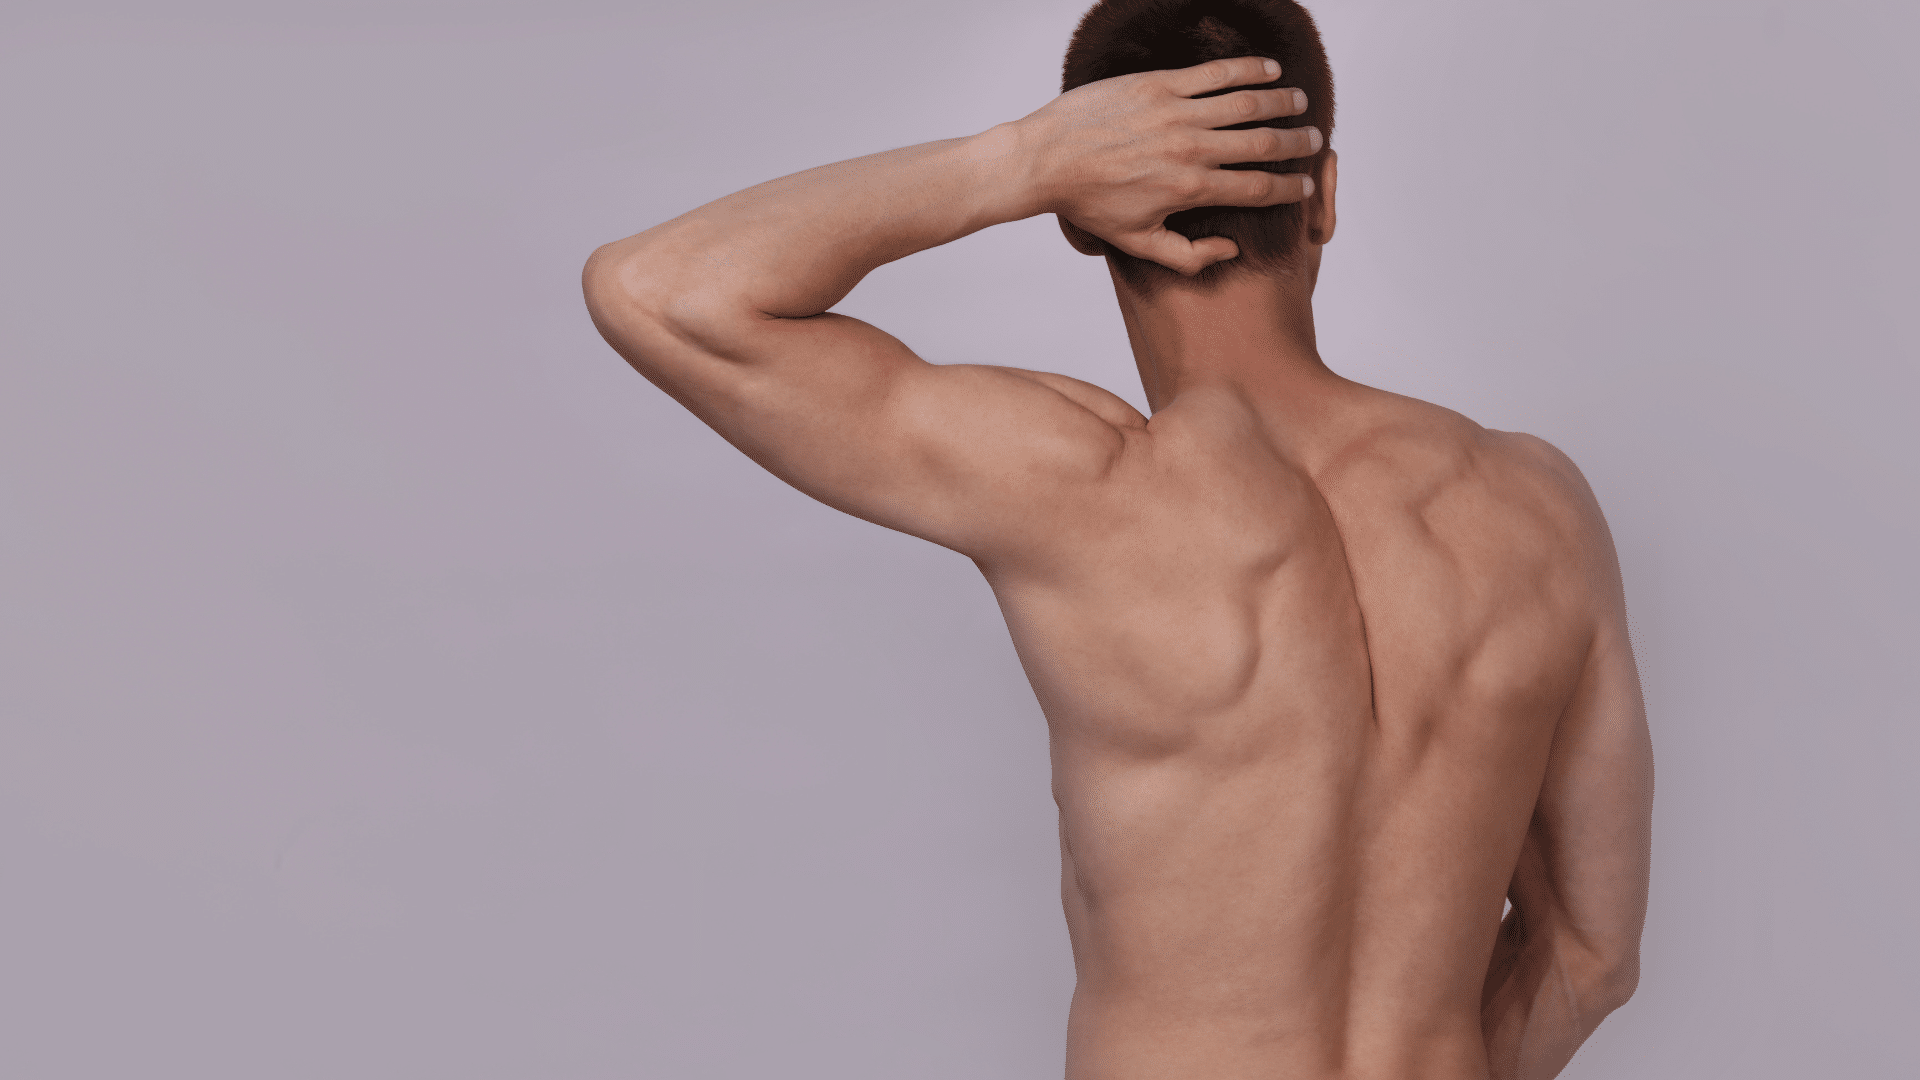 Nair vs Wax: The Definitive Hair Removal Guide for Men